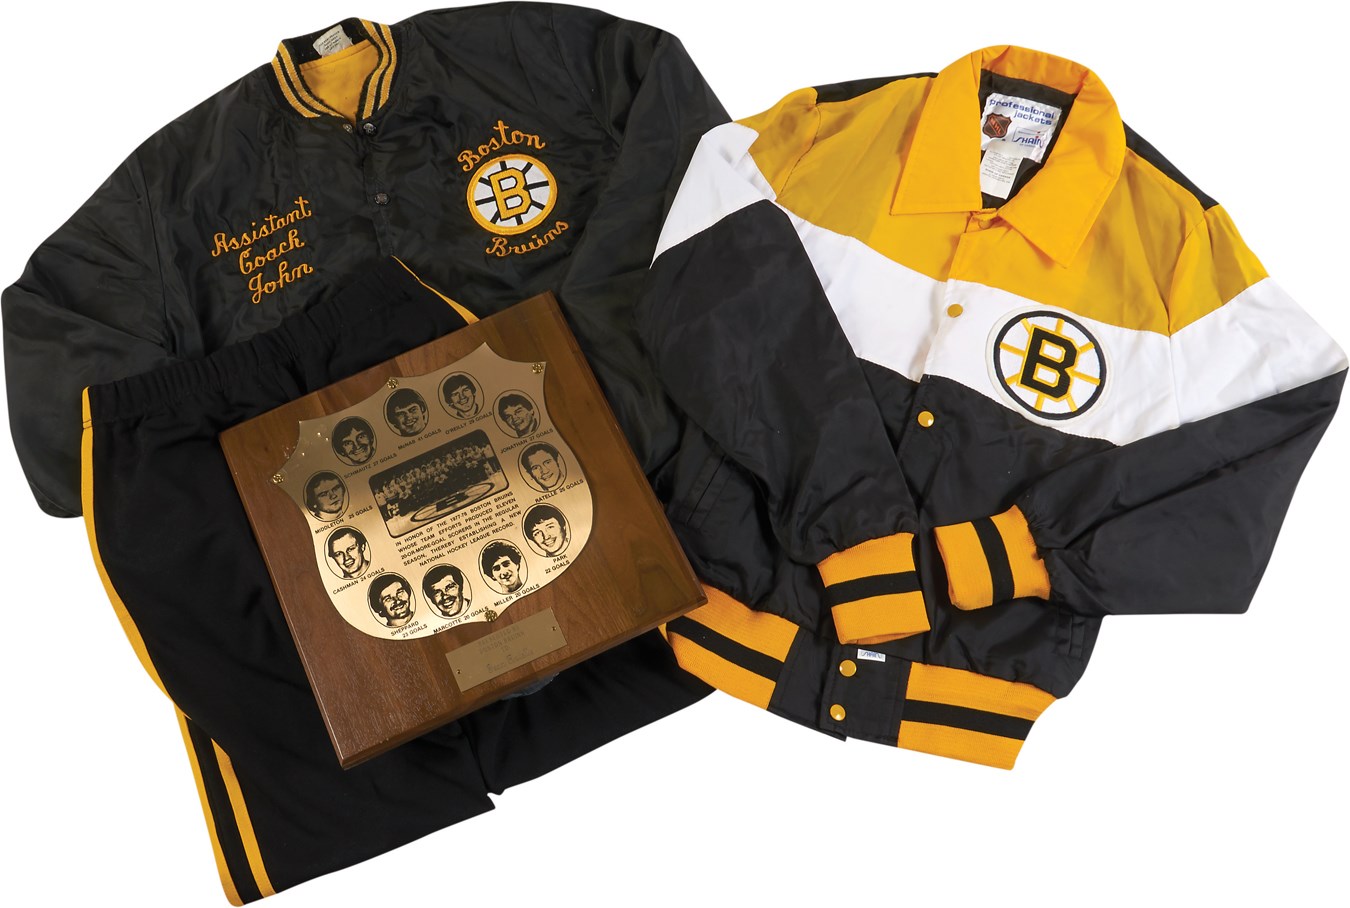 Jean Ratelle Boston Bruins Award Plaque, Jackets and Warm-Up Pants